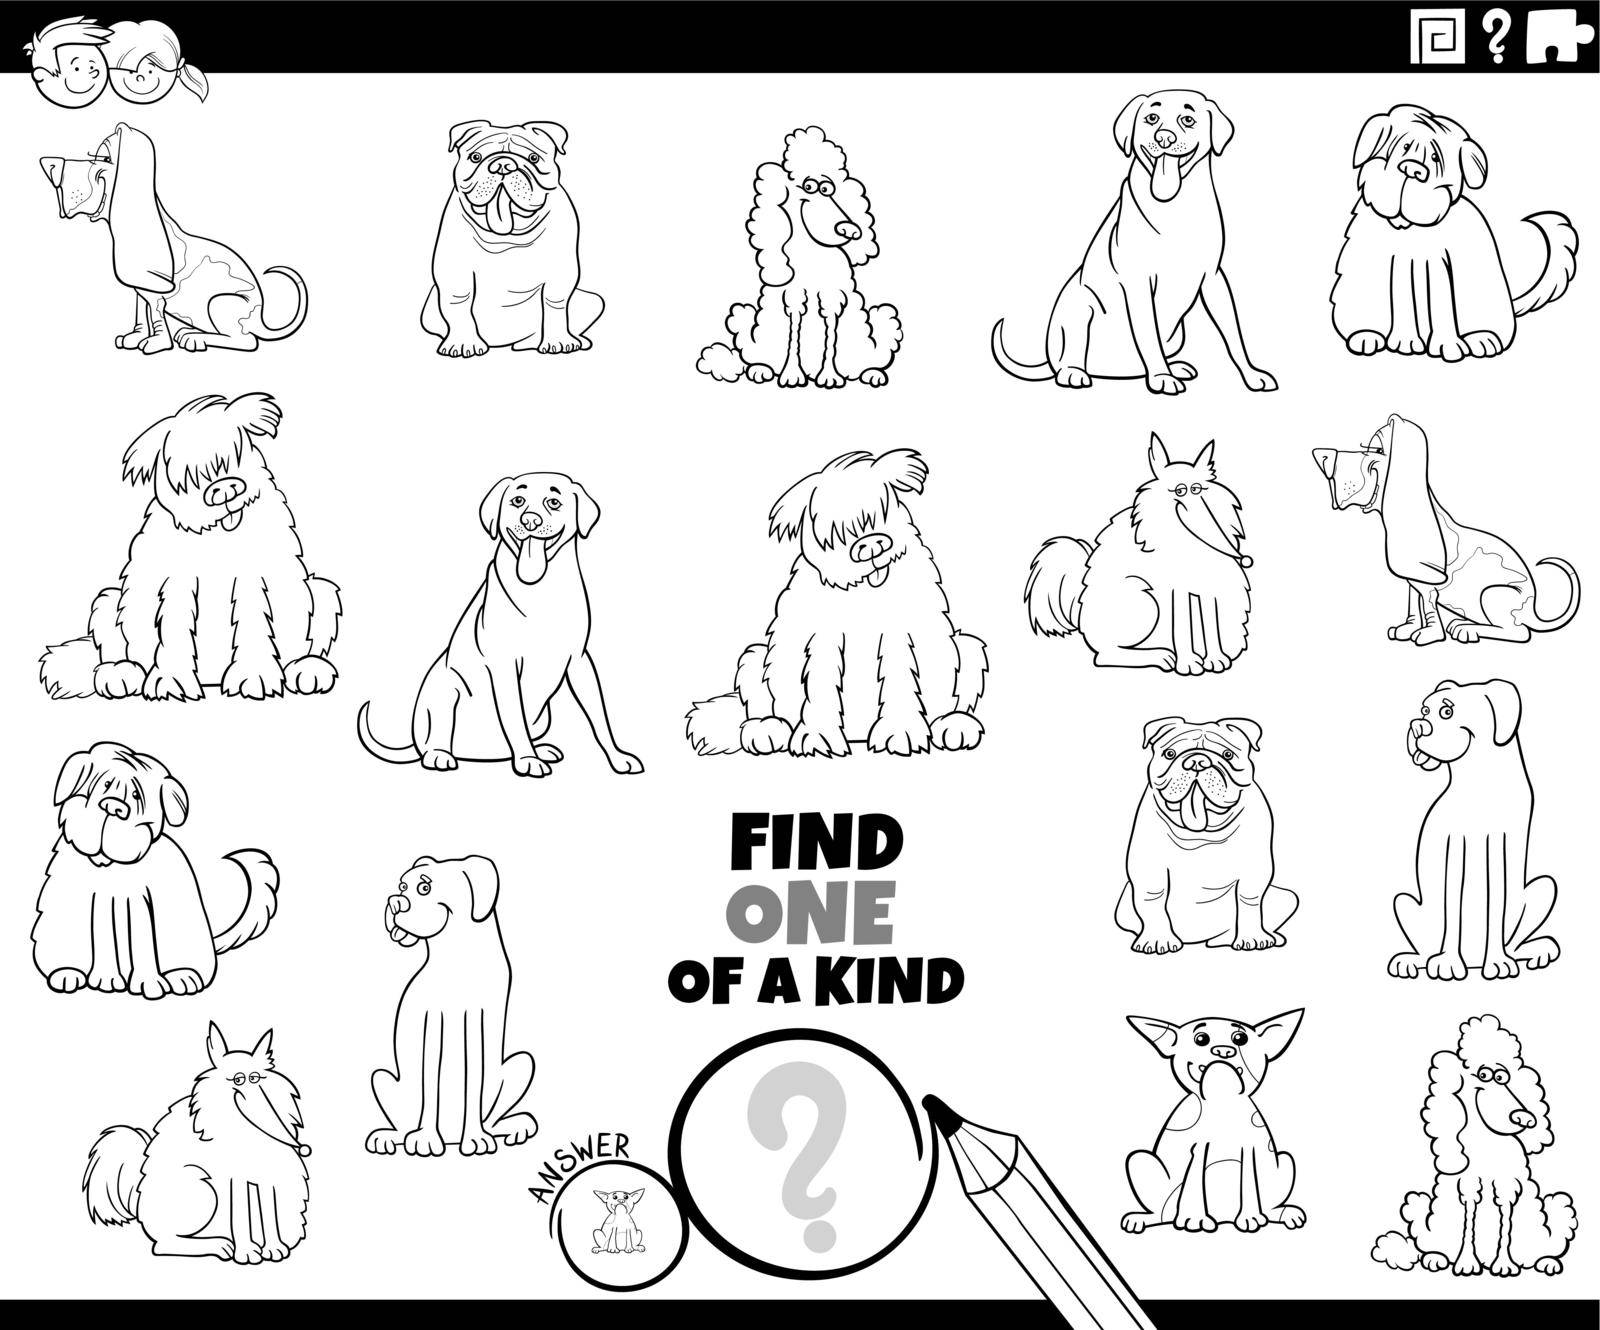 Black and white cartoon illustration of find one of a kind picture educational task with purebred dogs comic animal characters coloring book page